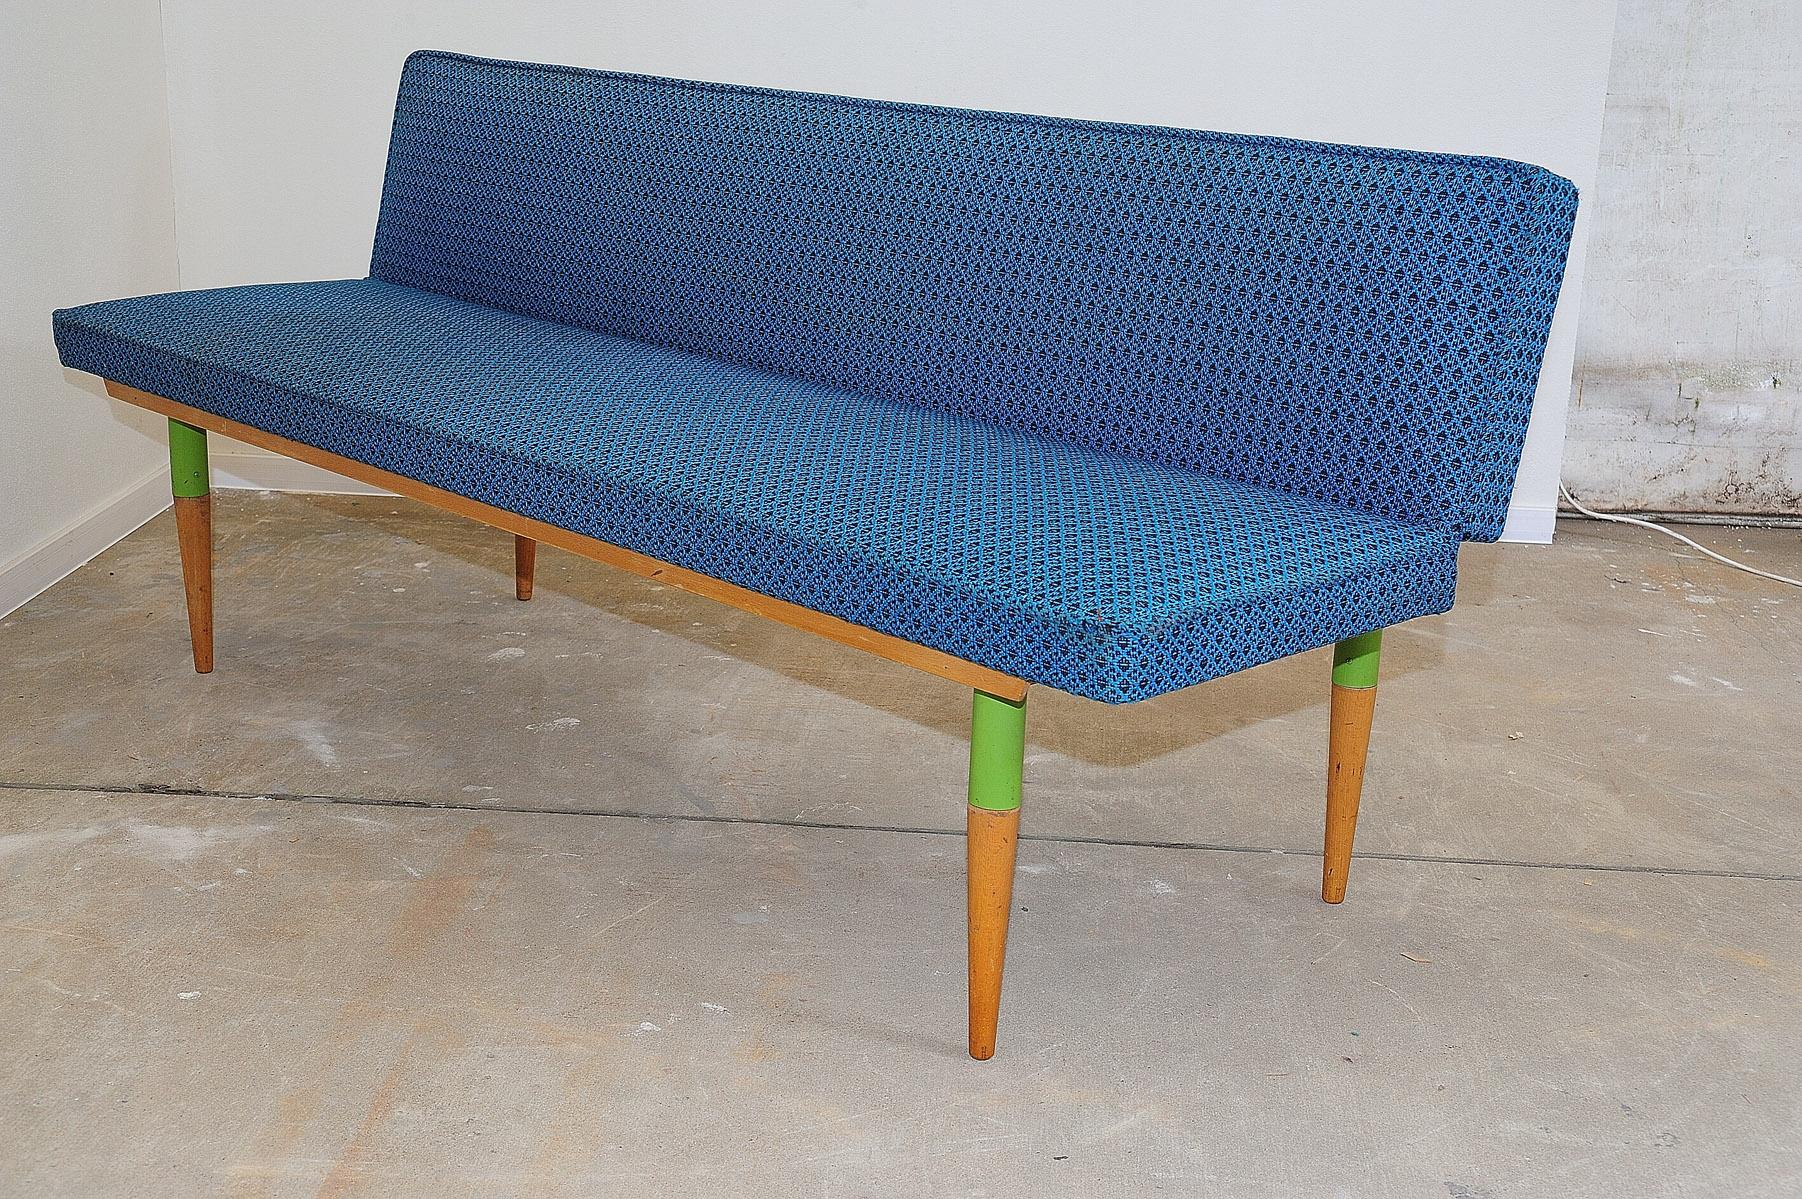 Midcentury sofa/daybed, made in the former Czechoslovakia in the 1960s, designed by Miroslav Navrátil. Material: beechwood, fabric. The sofa showing signs of age and using, but overall is in good preserved Vintage condition,

Measures :

Height: 80